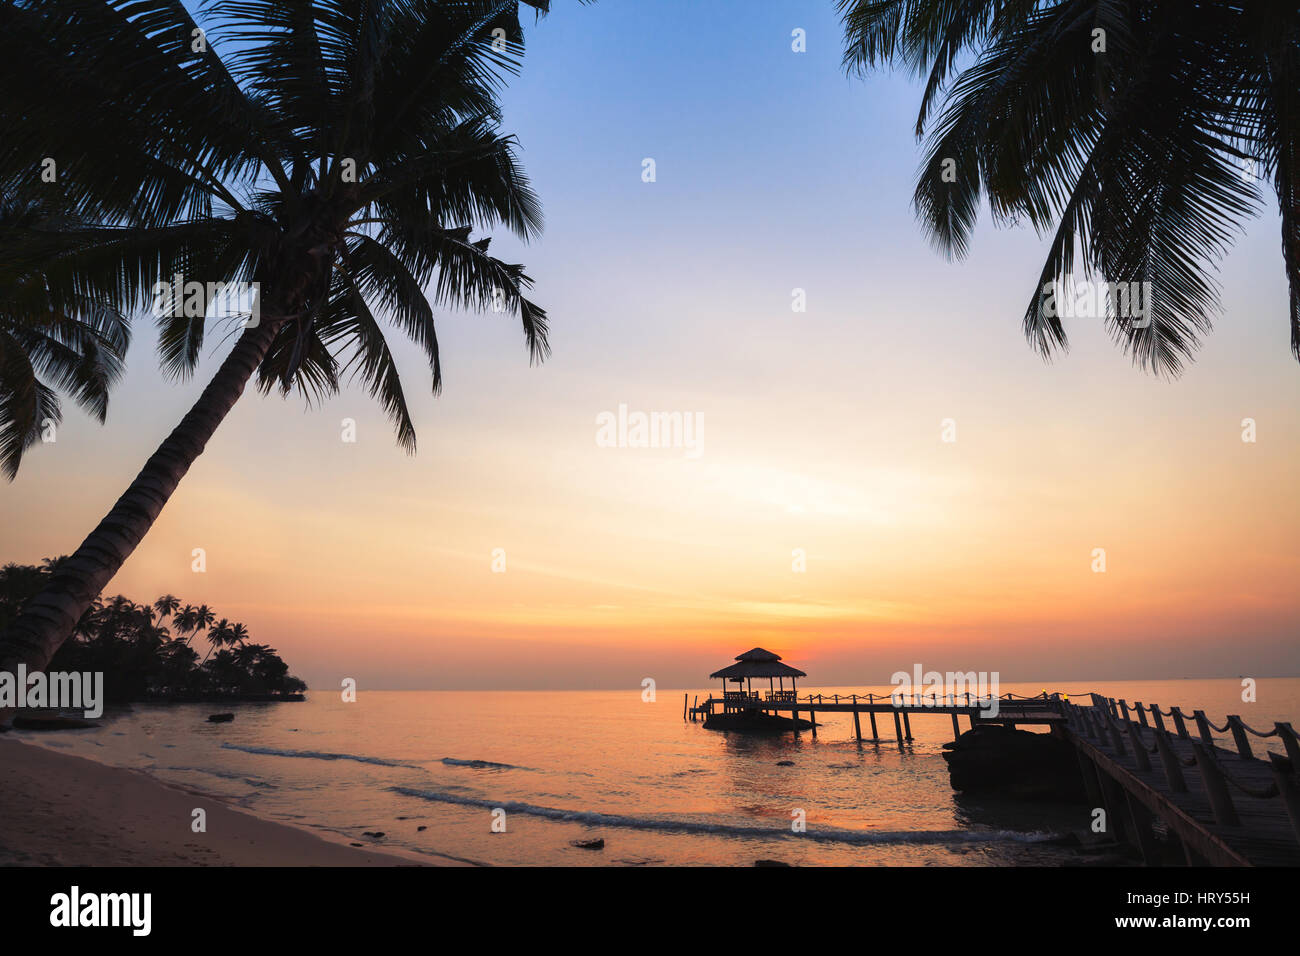 tropical beach background, beautiful sunset landscape with silhouettes of palm trees, vacation Stock Photo